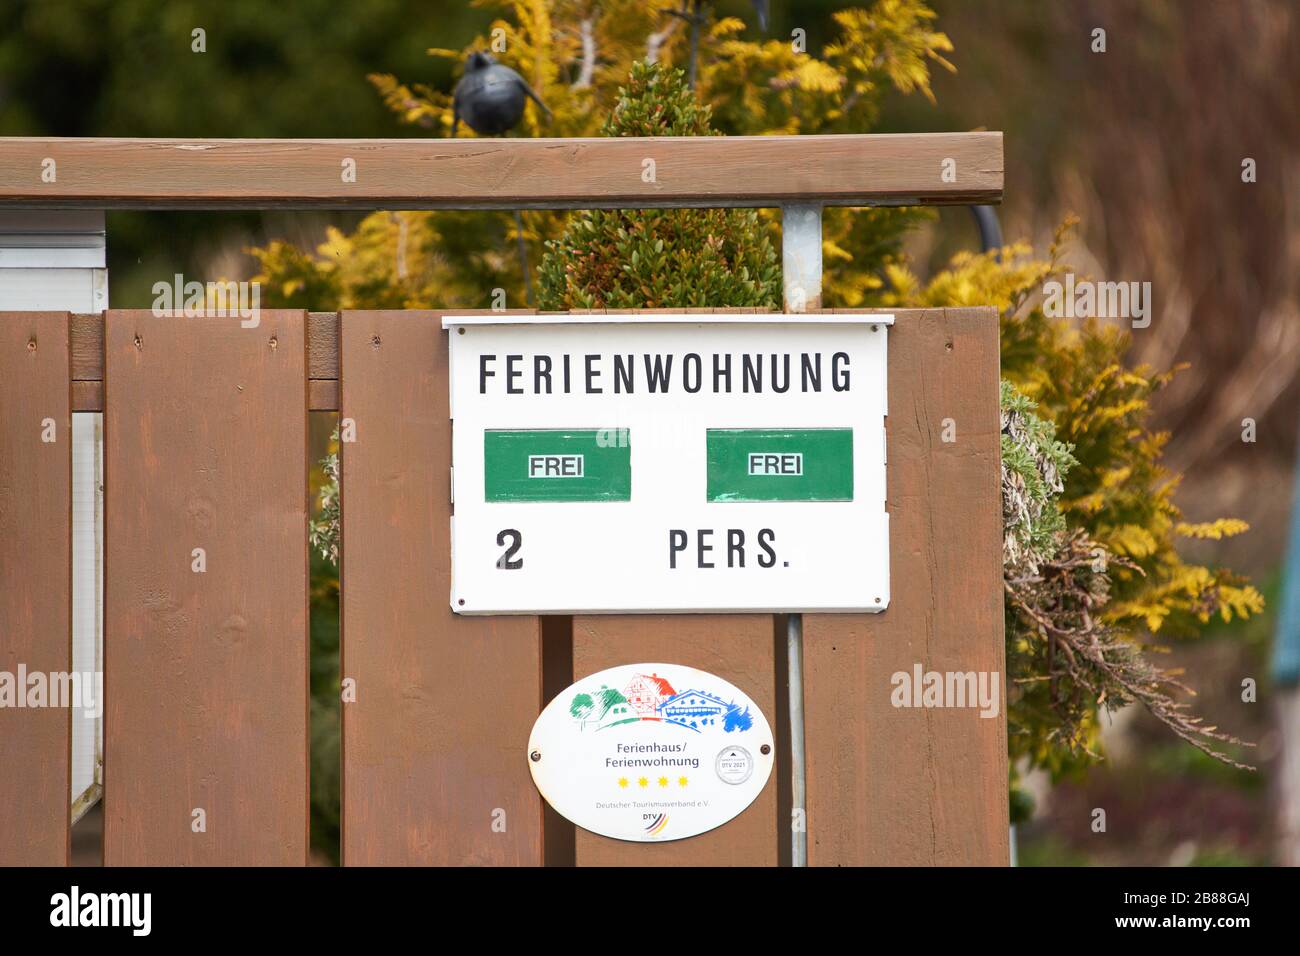 Hopfen am See, March 17, 2020. Hotels and vacation homes have no guests due to the Corona virus disease (COVID-19) on March 17, 2020 in Hopfen am See, Germany  © Peter Schatz / Alamy Live News Stock Photo